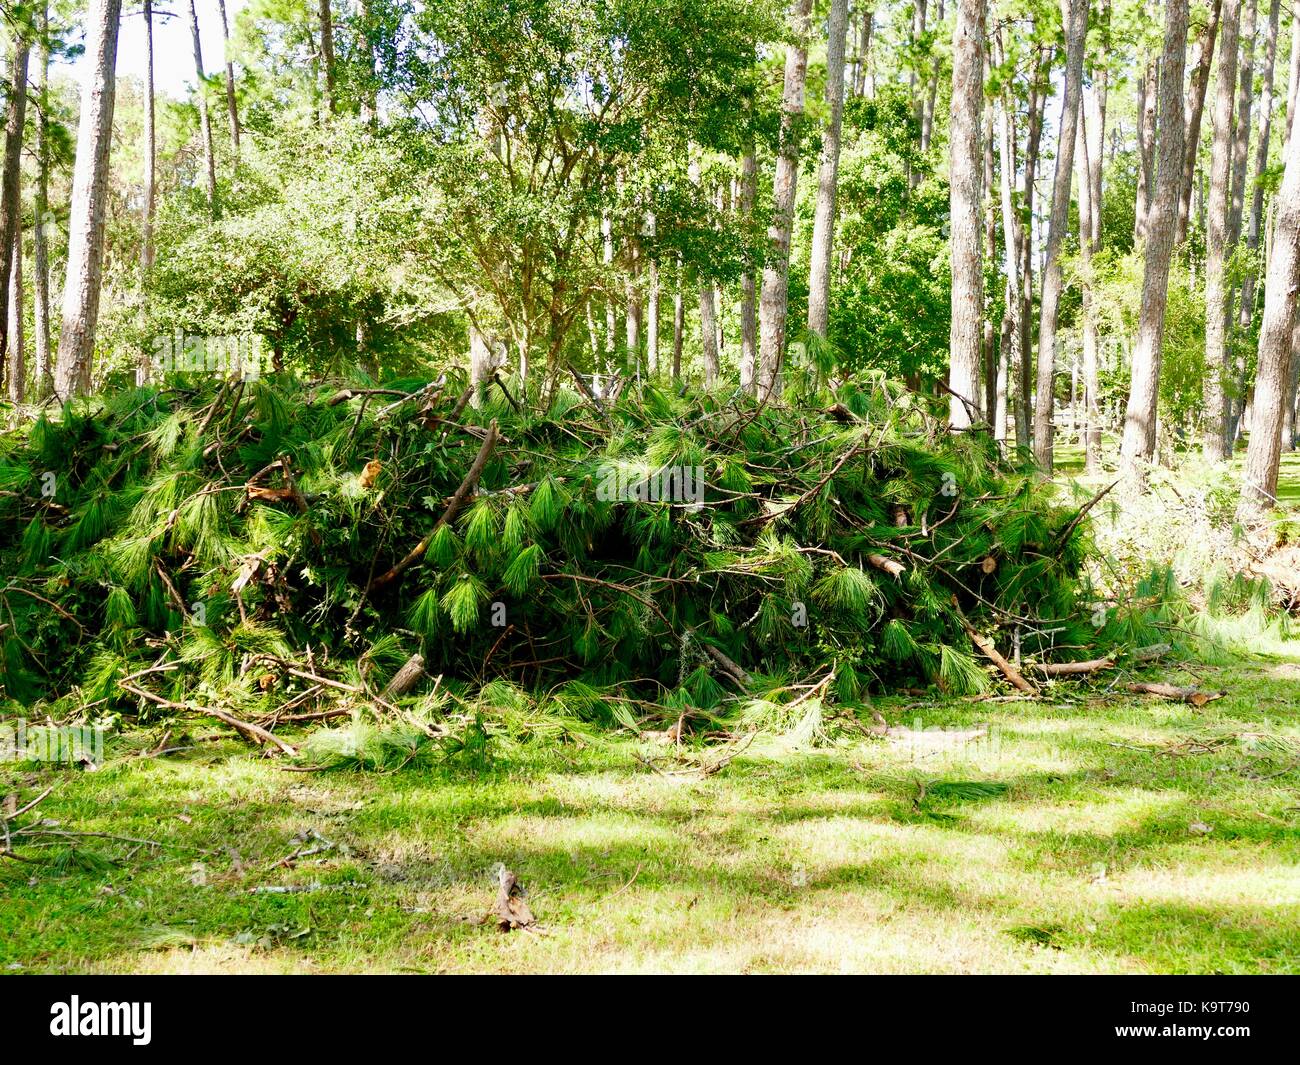 Stacked pile of pine tree limbs. Cleanup of city park after storm. Gainesville, Florida, USA. Stock Photo